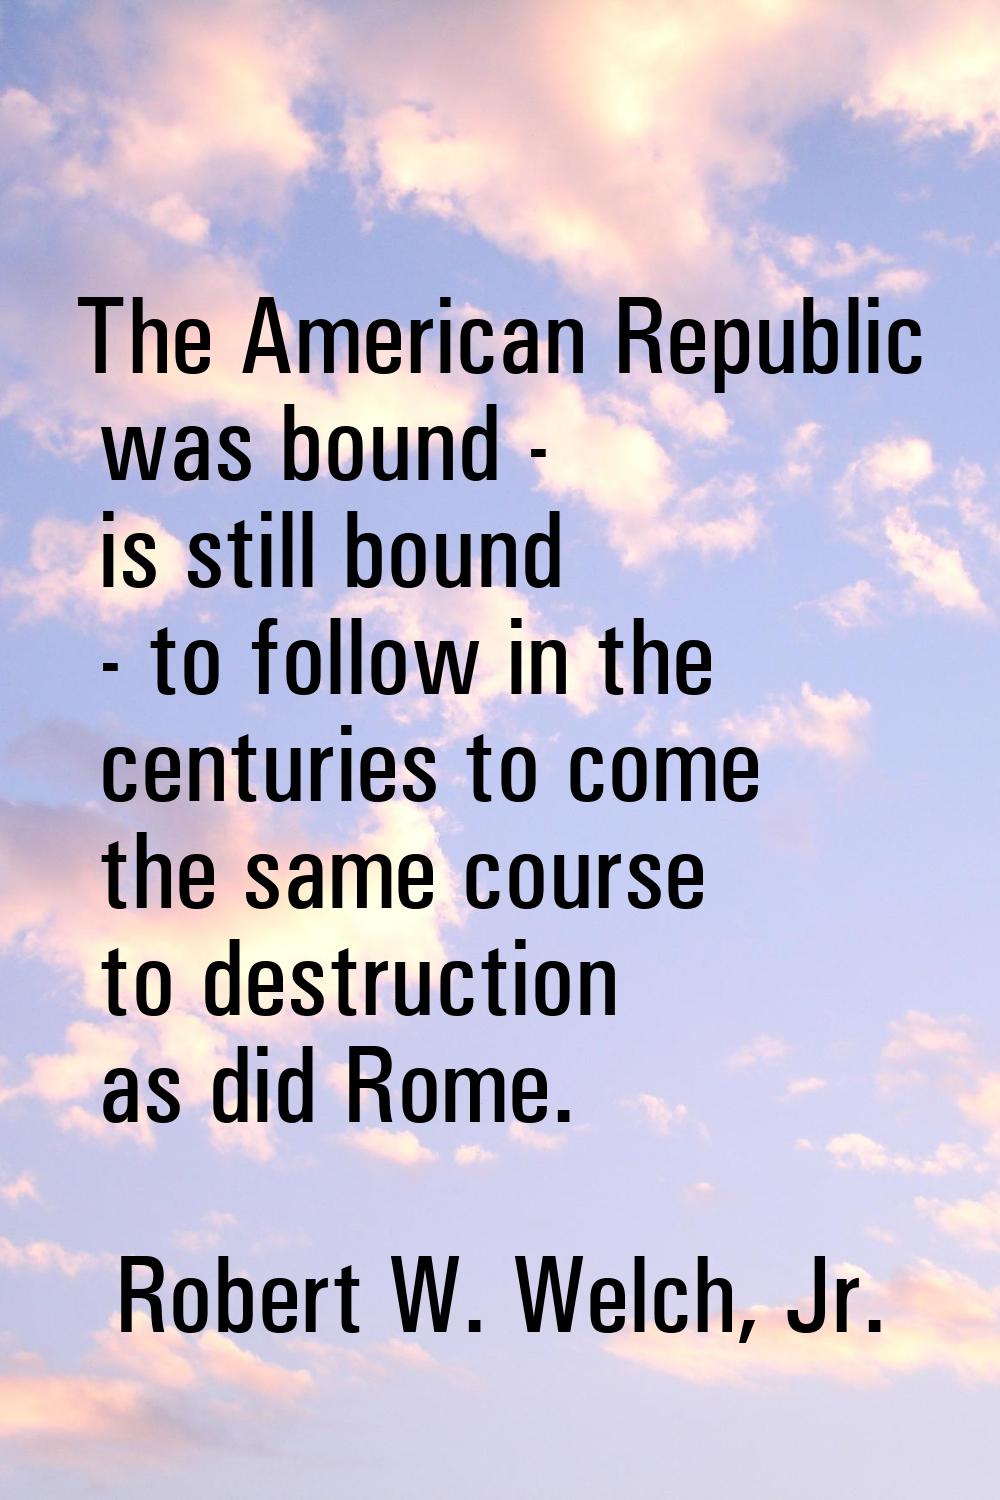 The American Republic was bound - is still bound - to follow in the centuries to come the same cour